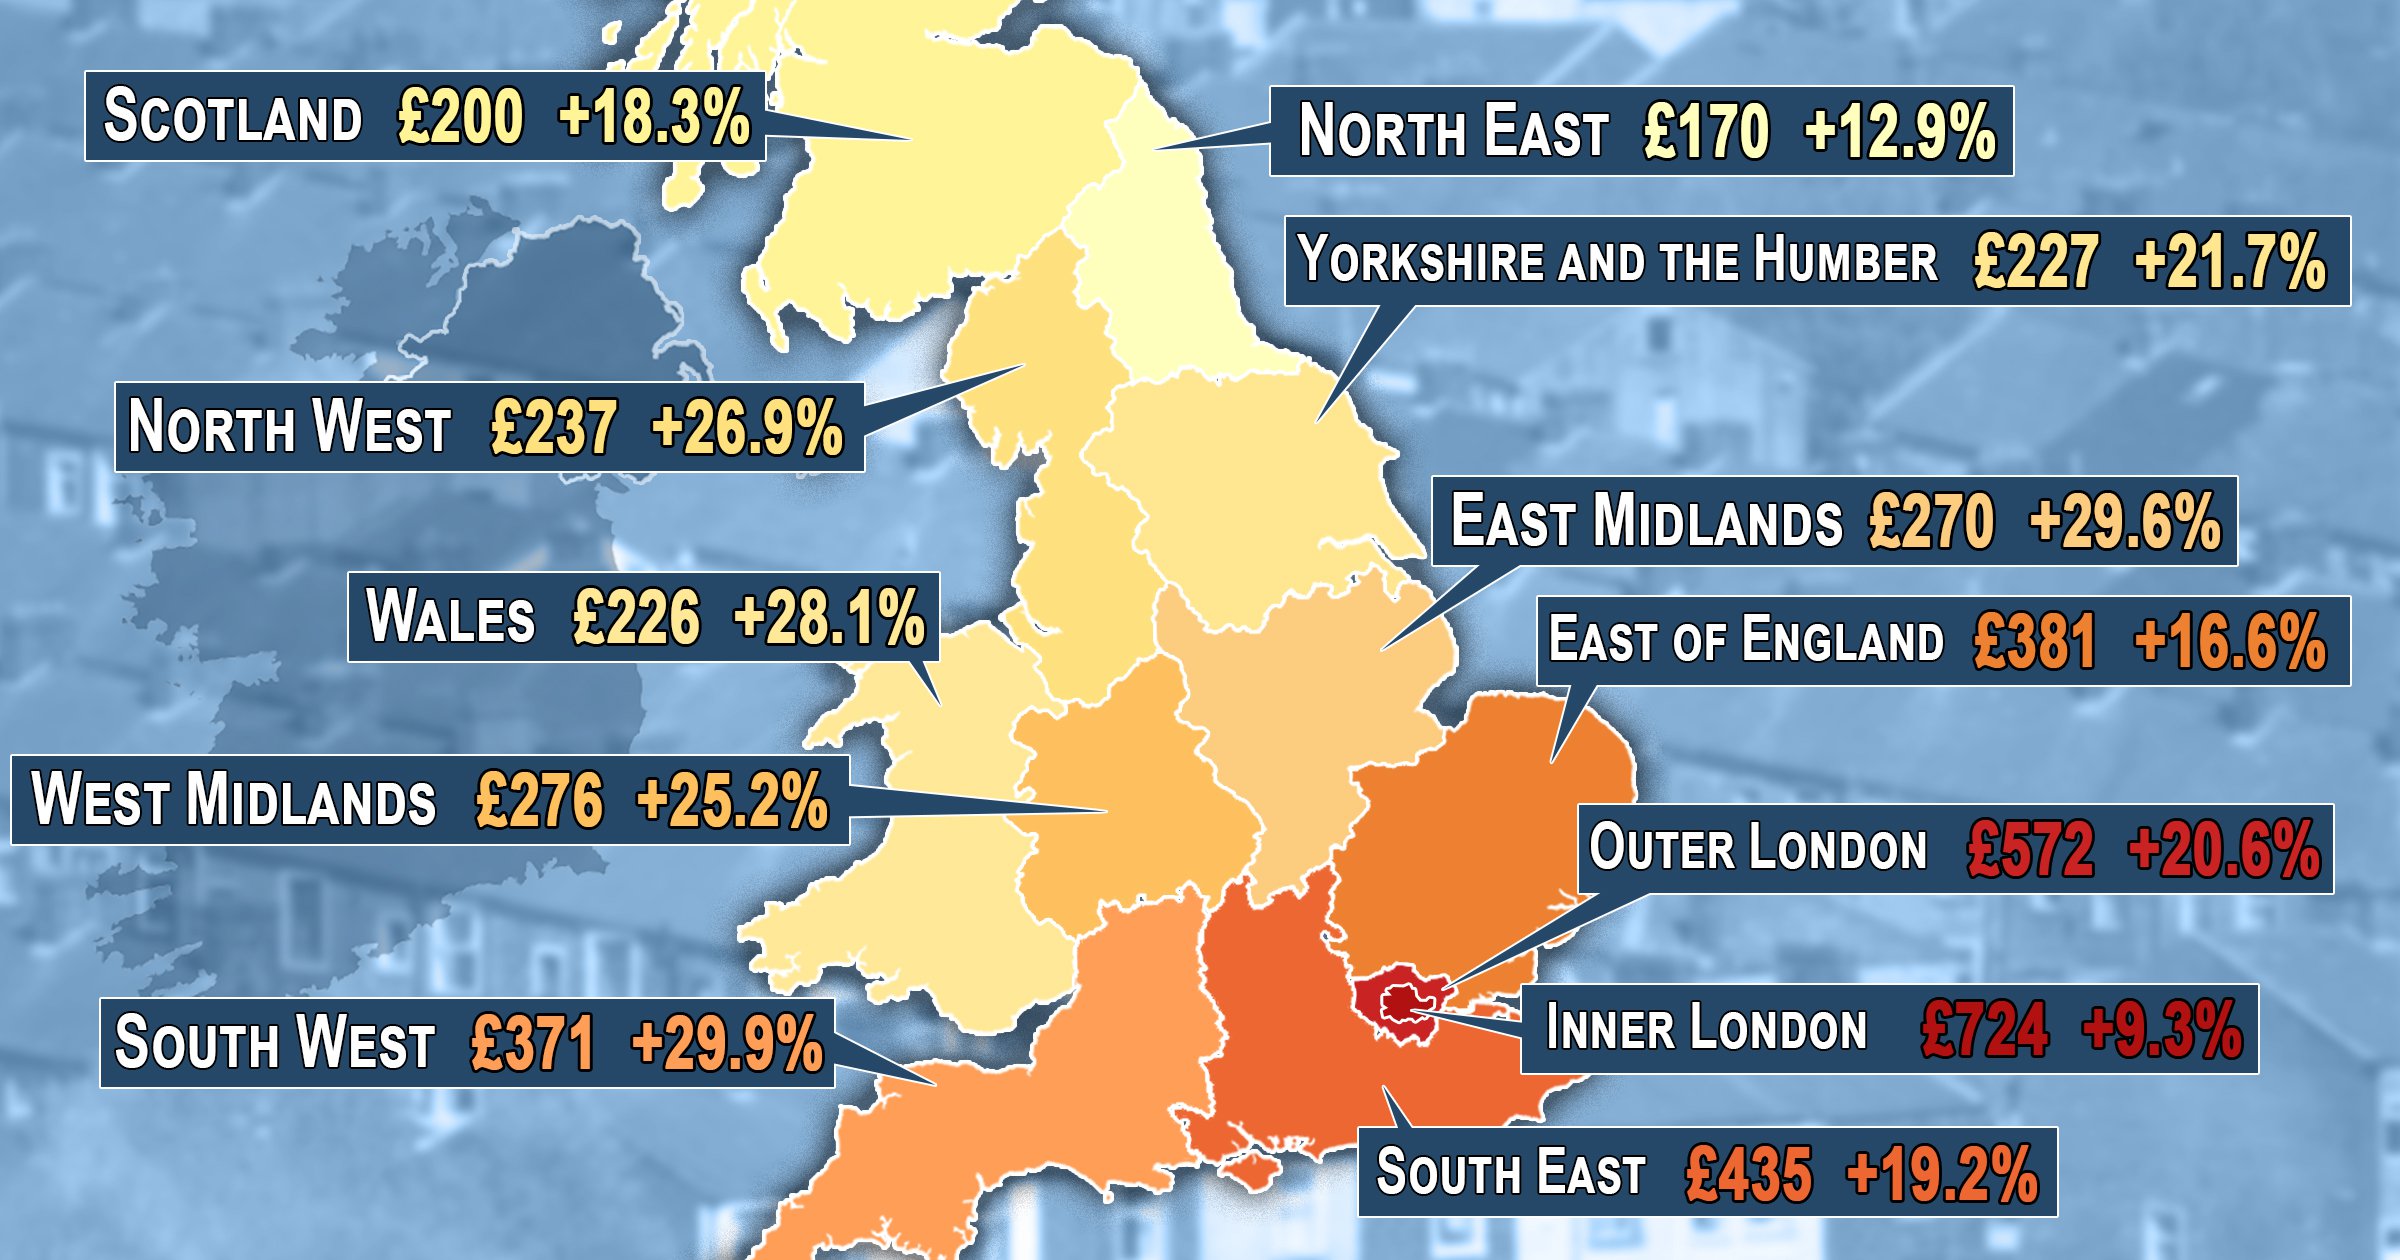 This map shows how much a square foot of property costs in different parts of the UK